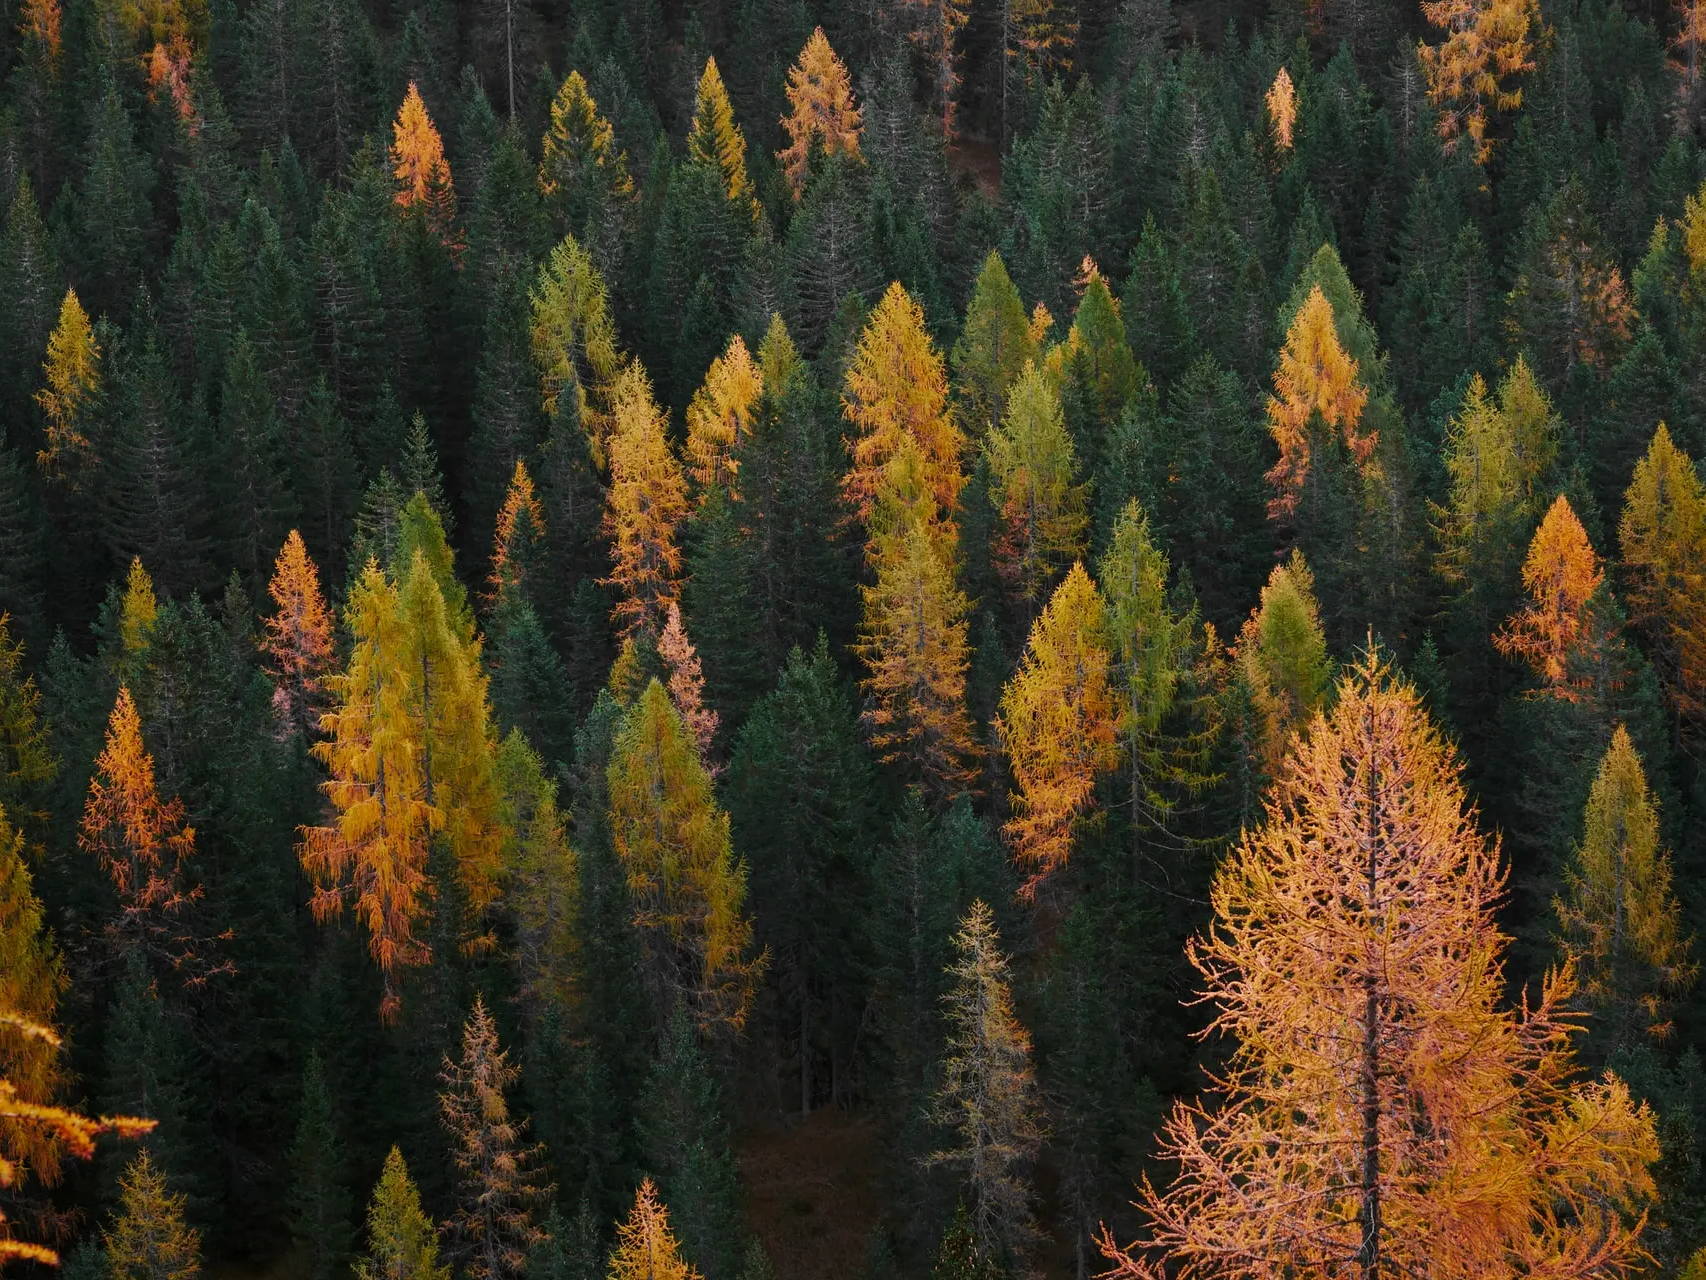 Green and yellow trees